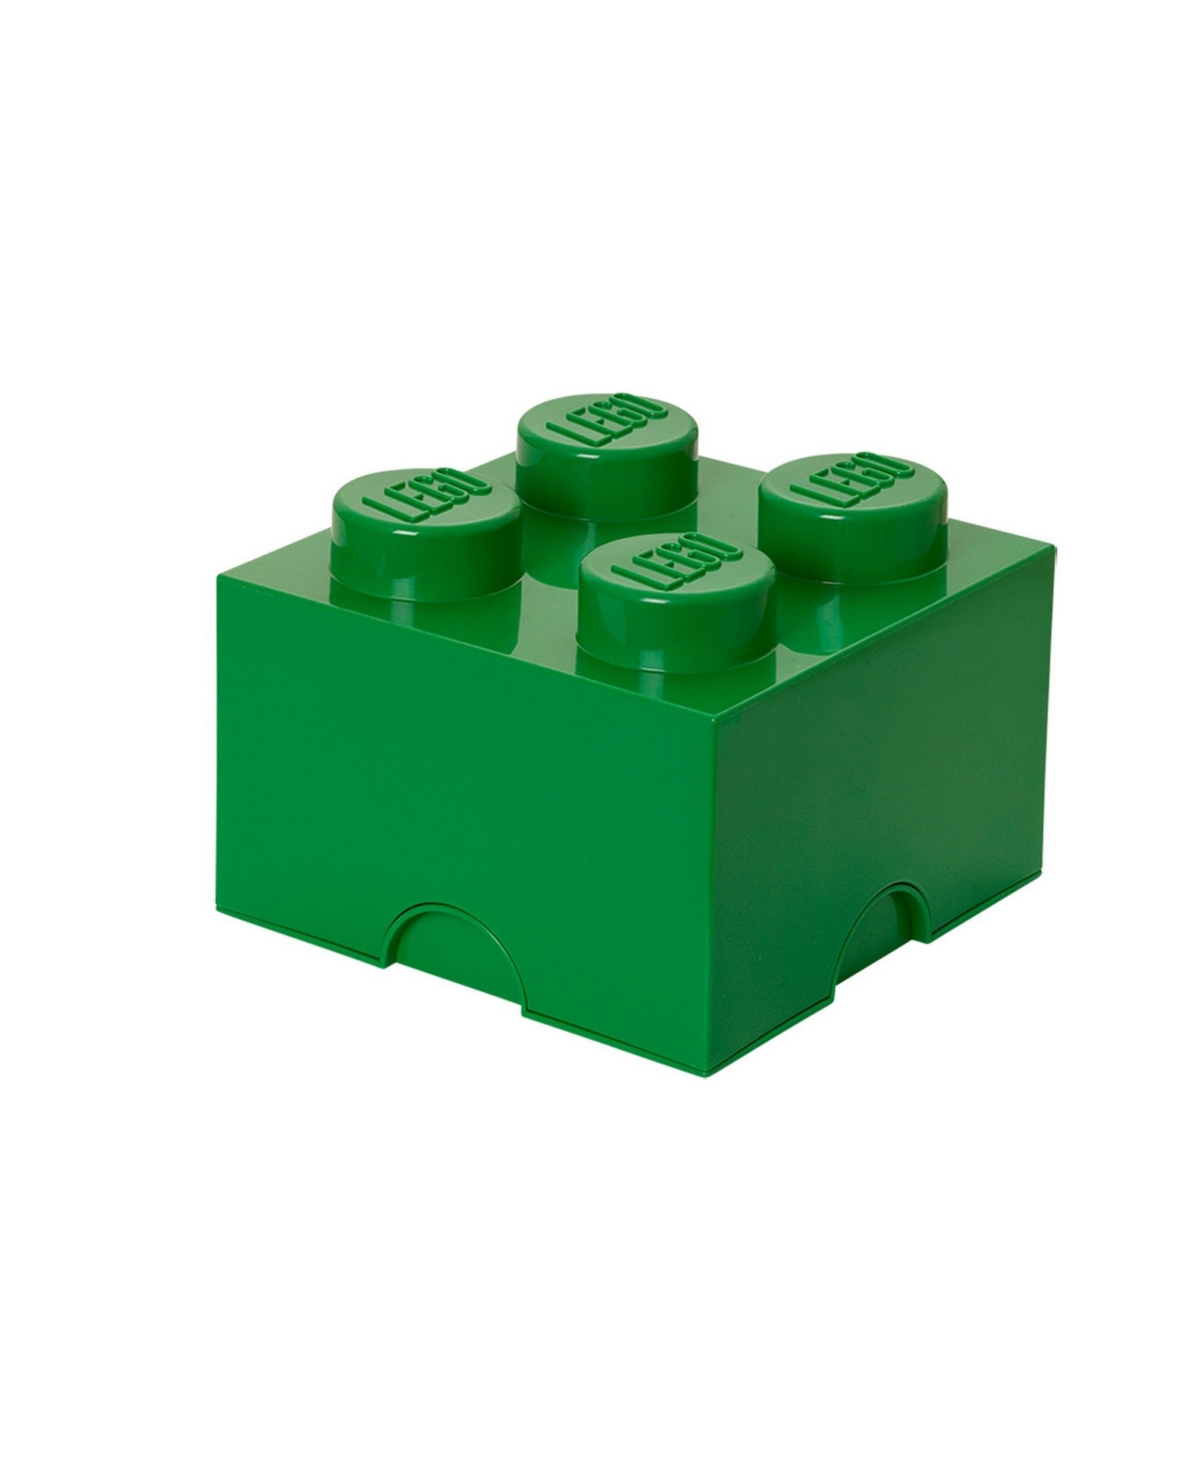 Lego Storage Brick With 4 Knobs In Green